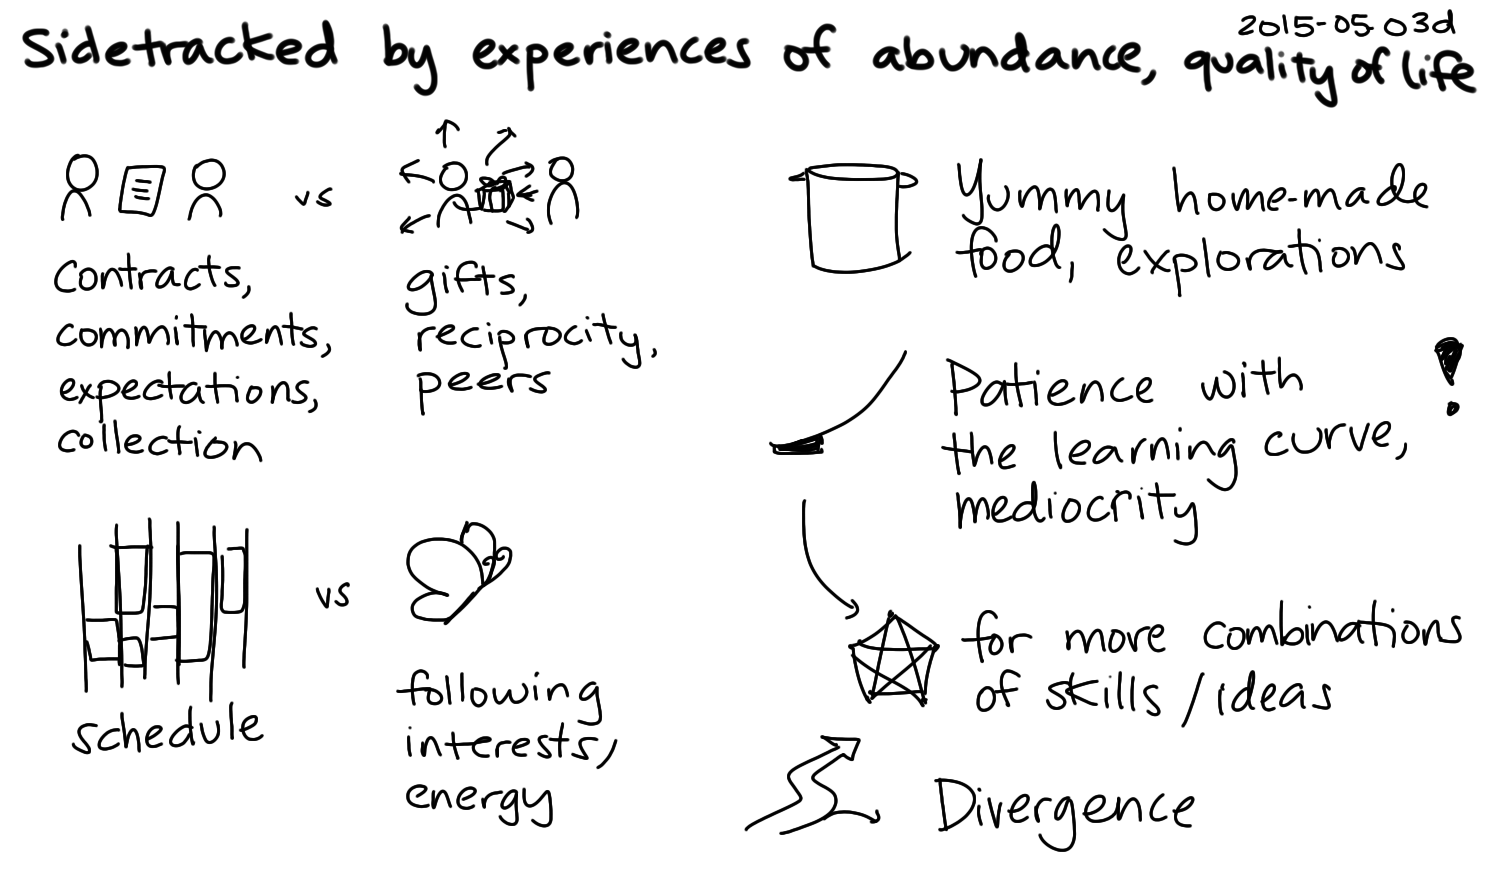 2015-05-03d Sidetracked by experiences of abundance, quality of life -- index card #experiment #success #quality-of-life.png